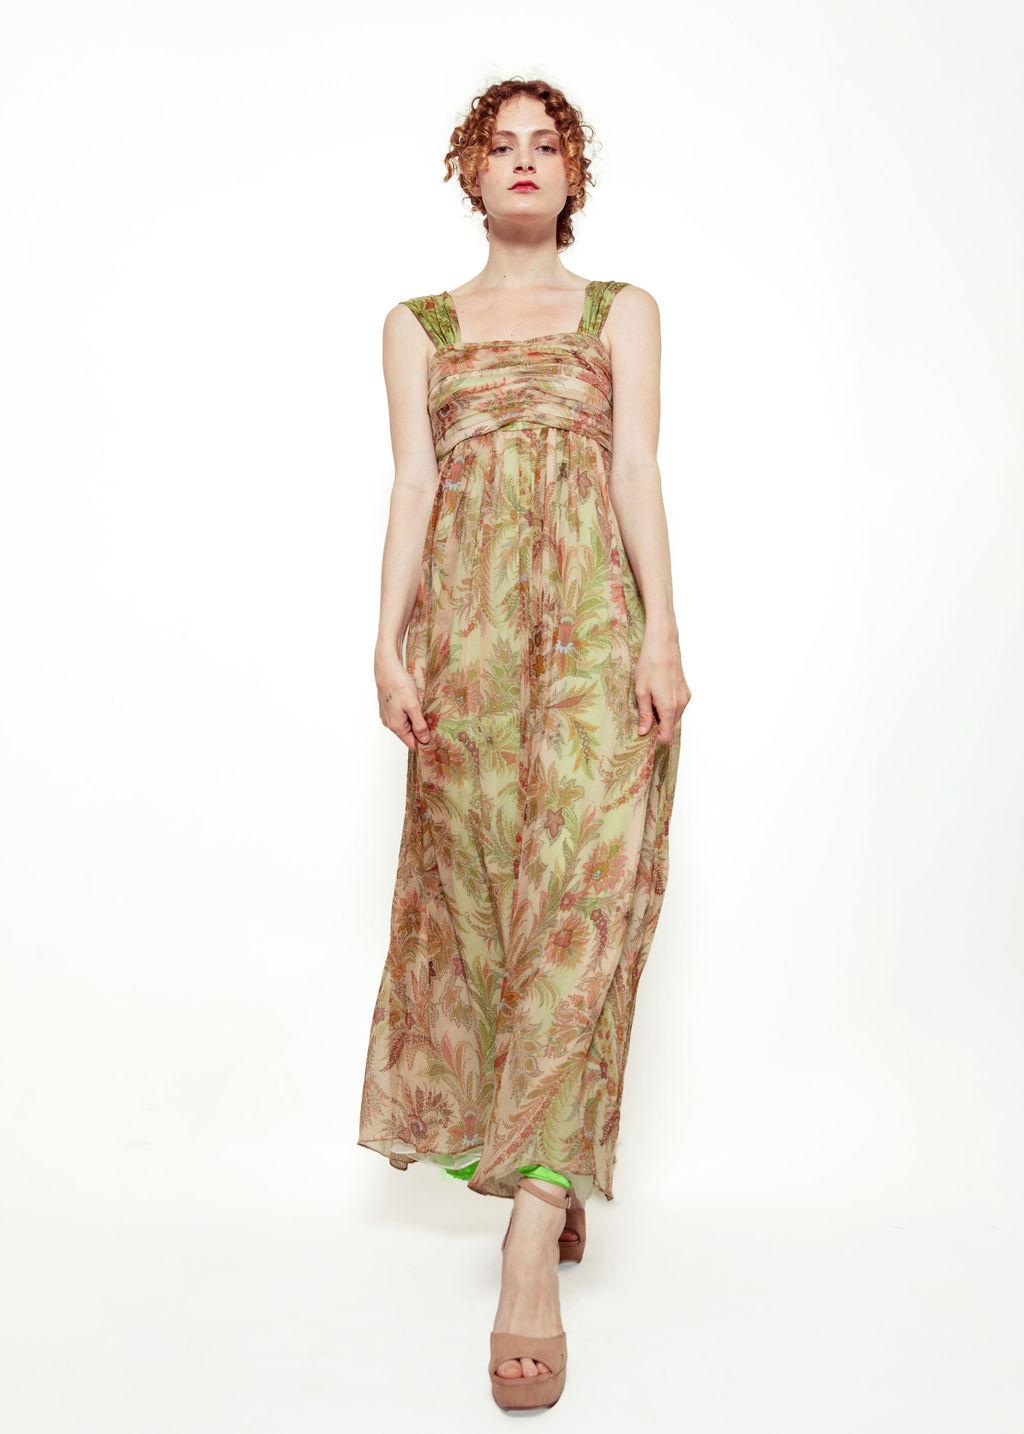 Wear this Custom dress made with Fabric from the Design house, Etro. 

The dress is made from a paisley print chiffon.  With it's hint of lime green lining that peeks through slightly. This dress features a hidden side zipper, and 1.5